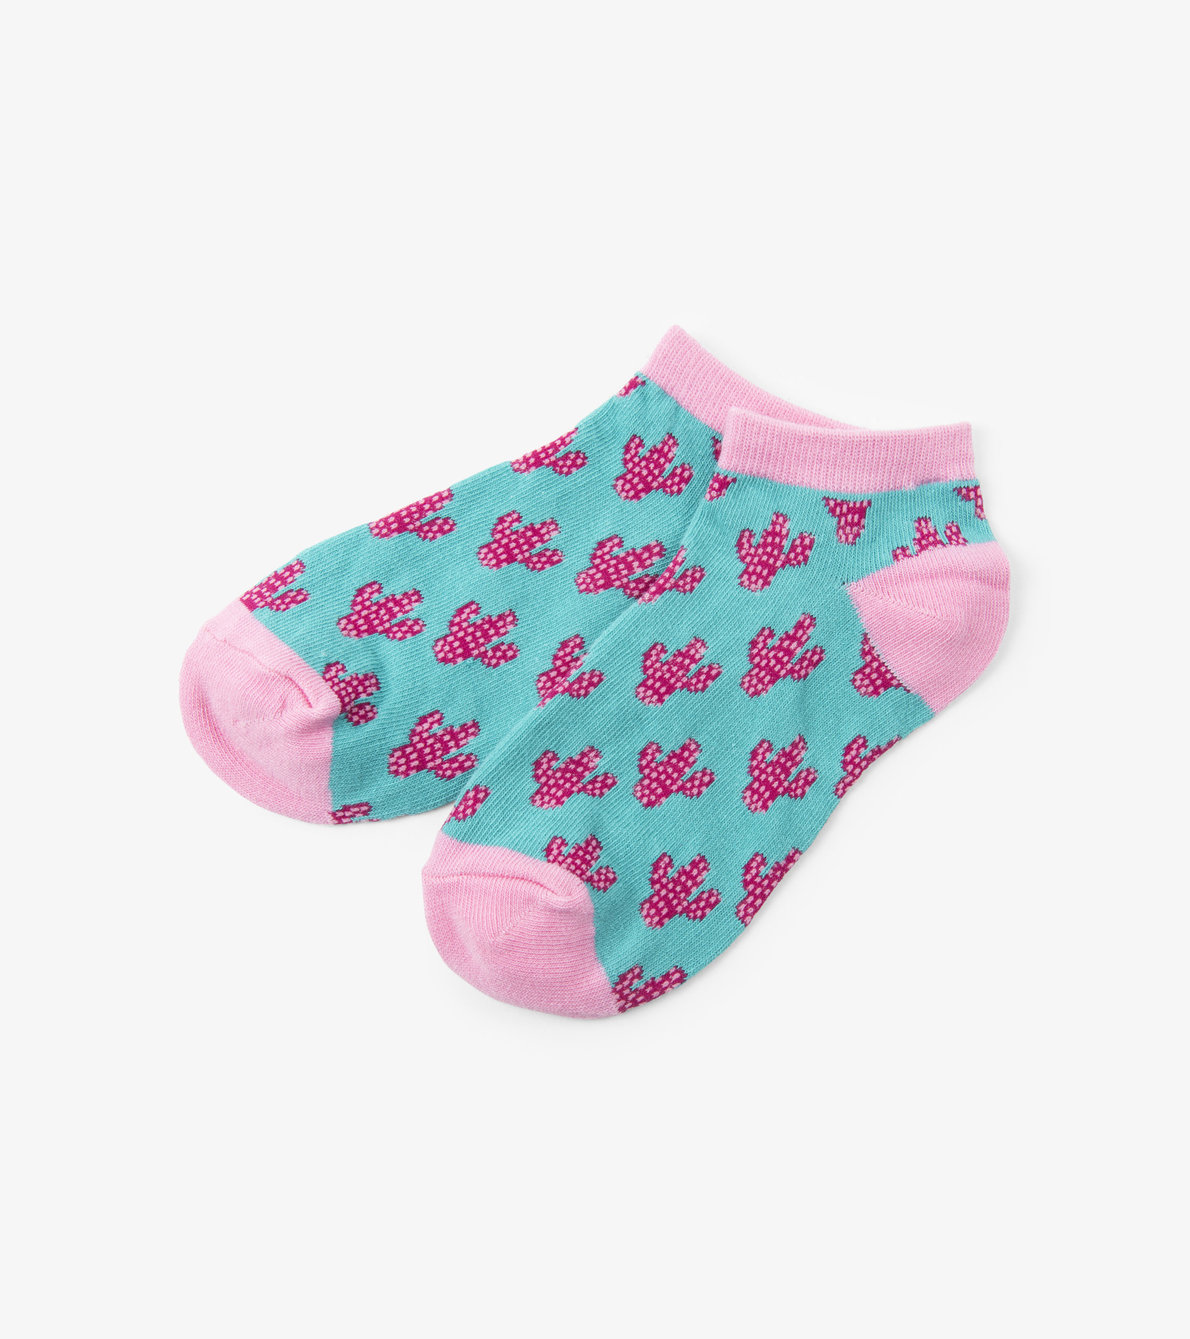 View larger image of Cactus Women's Ankle Socks